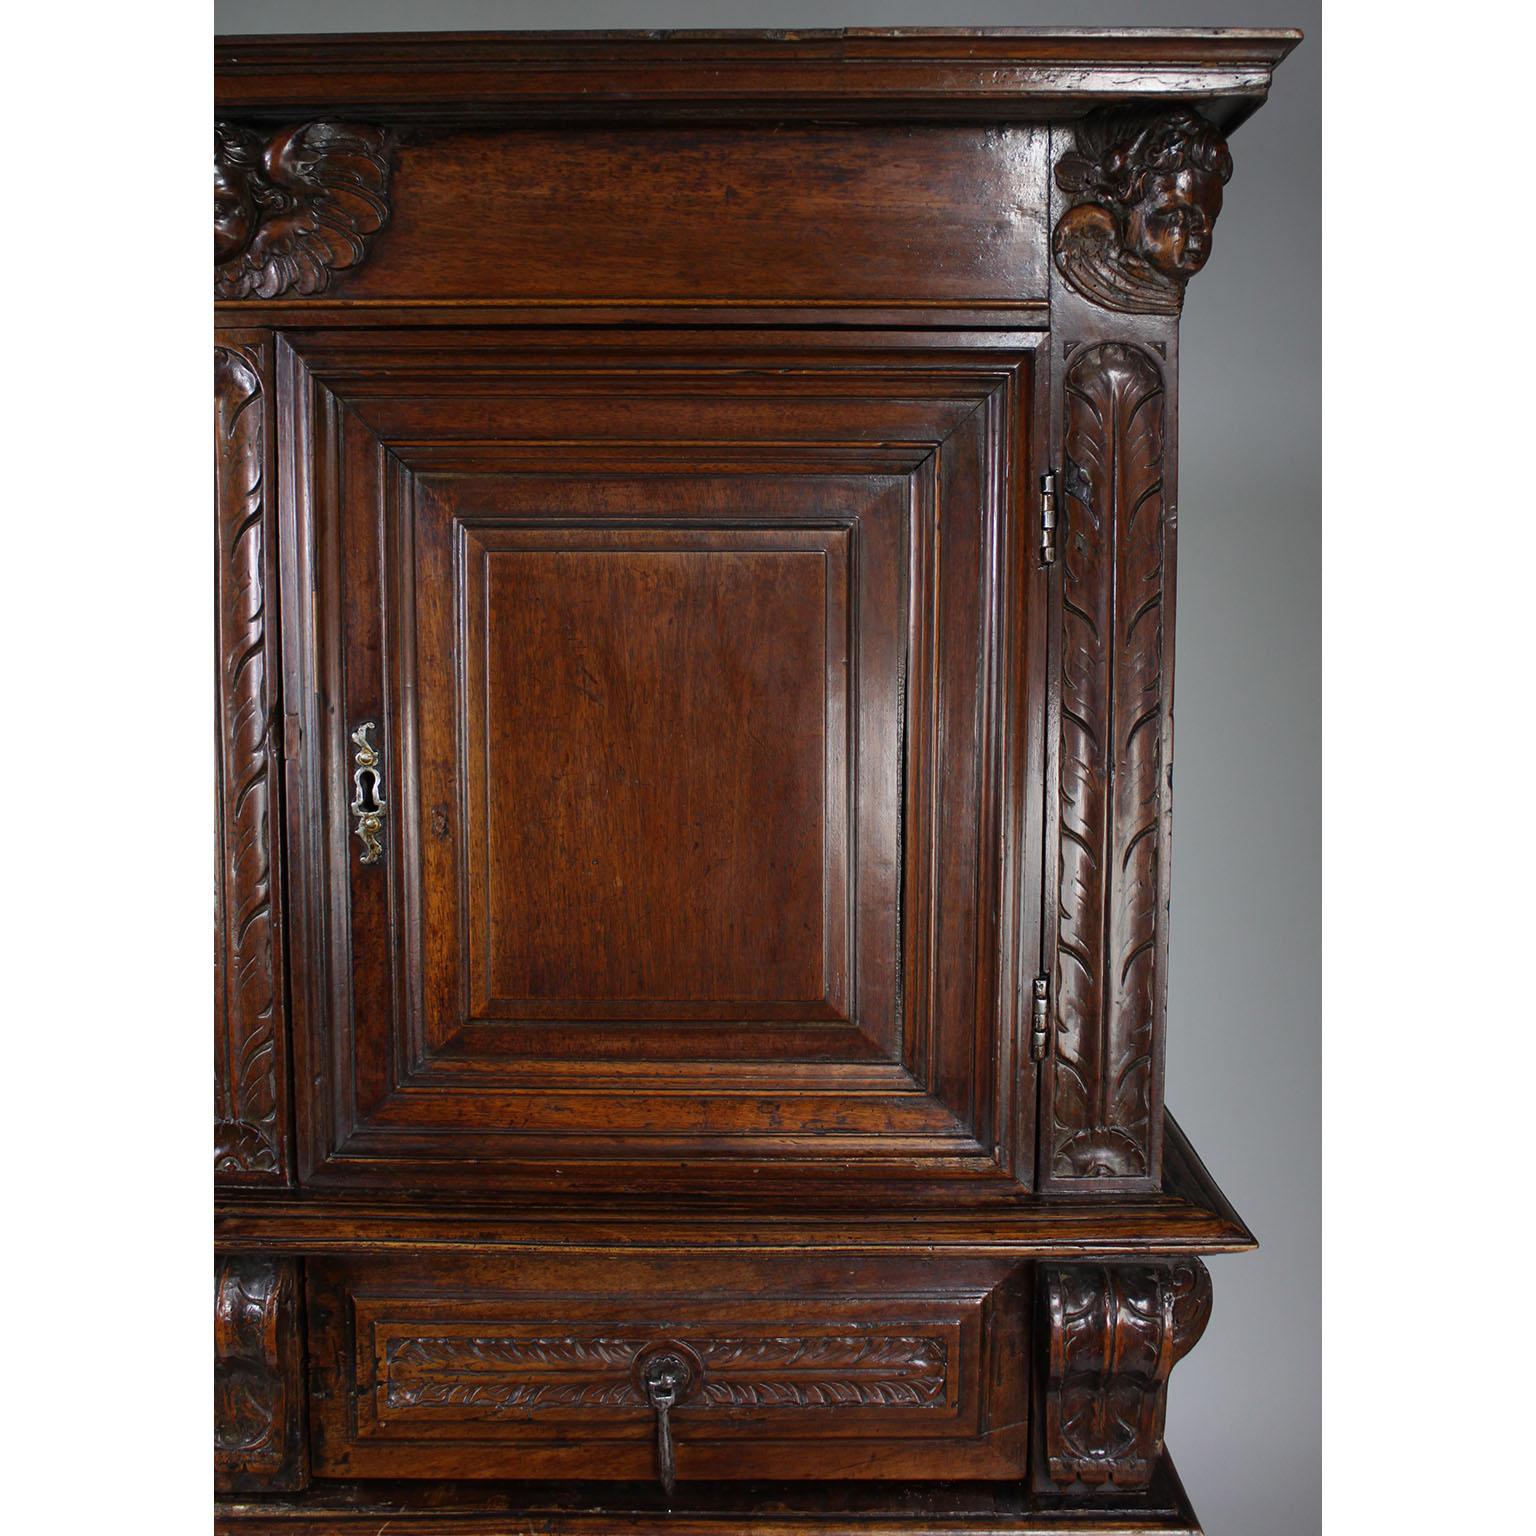 Metal A 17th-18th Century French/Italian Renaissance Walnut Carved Credenza Cabinet For Sale